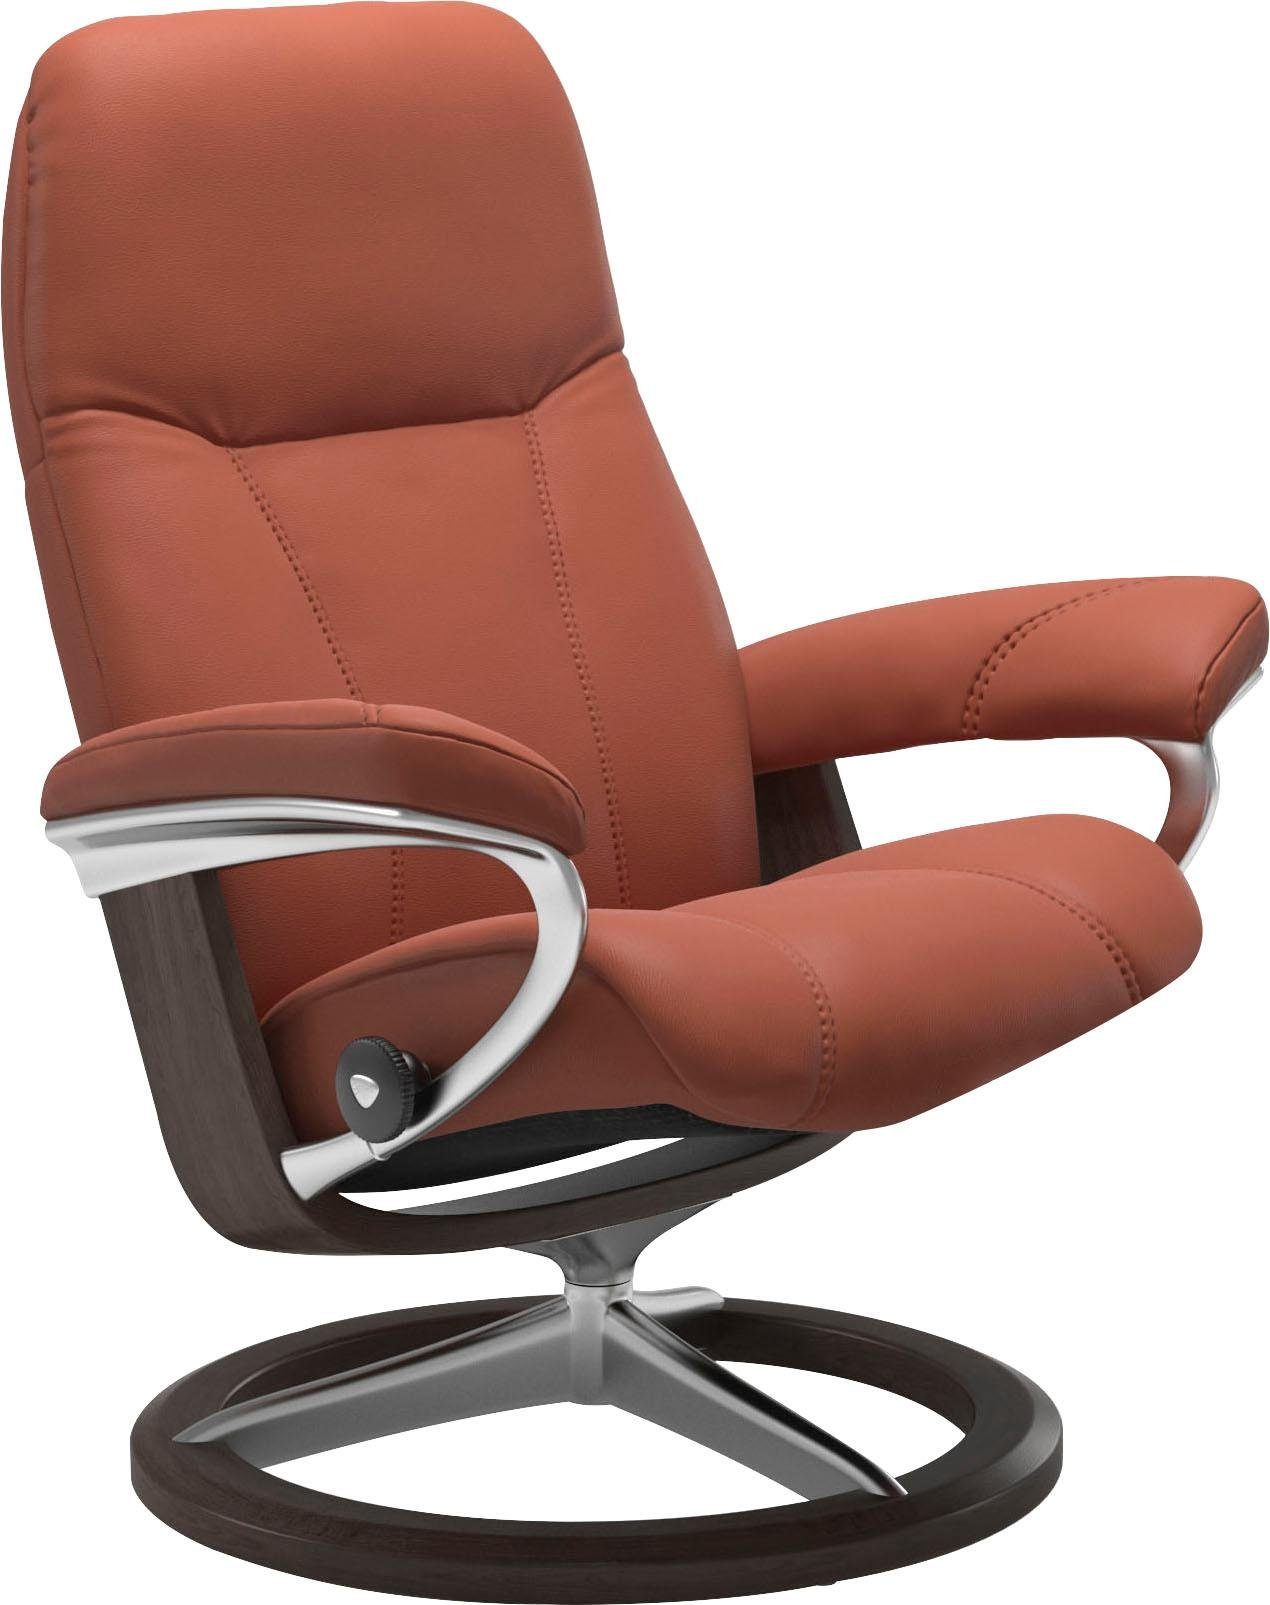 Signature Wenge L, Stressless® Relaxsessel Base, Größe Gestell Consul, mit